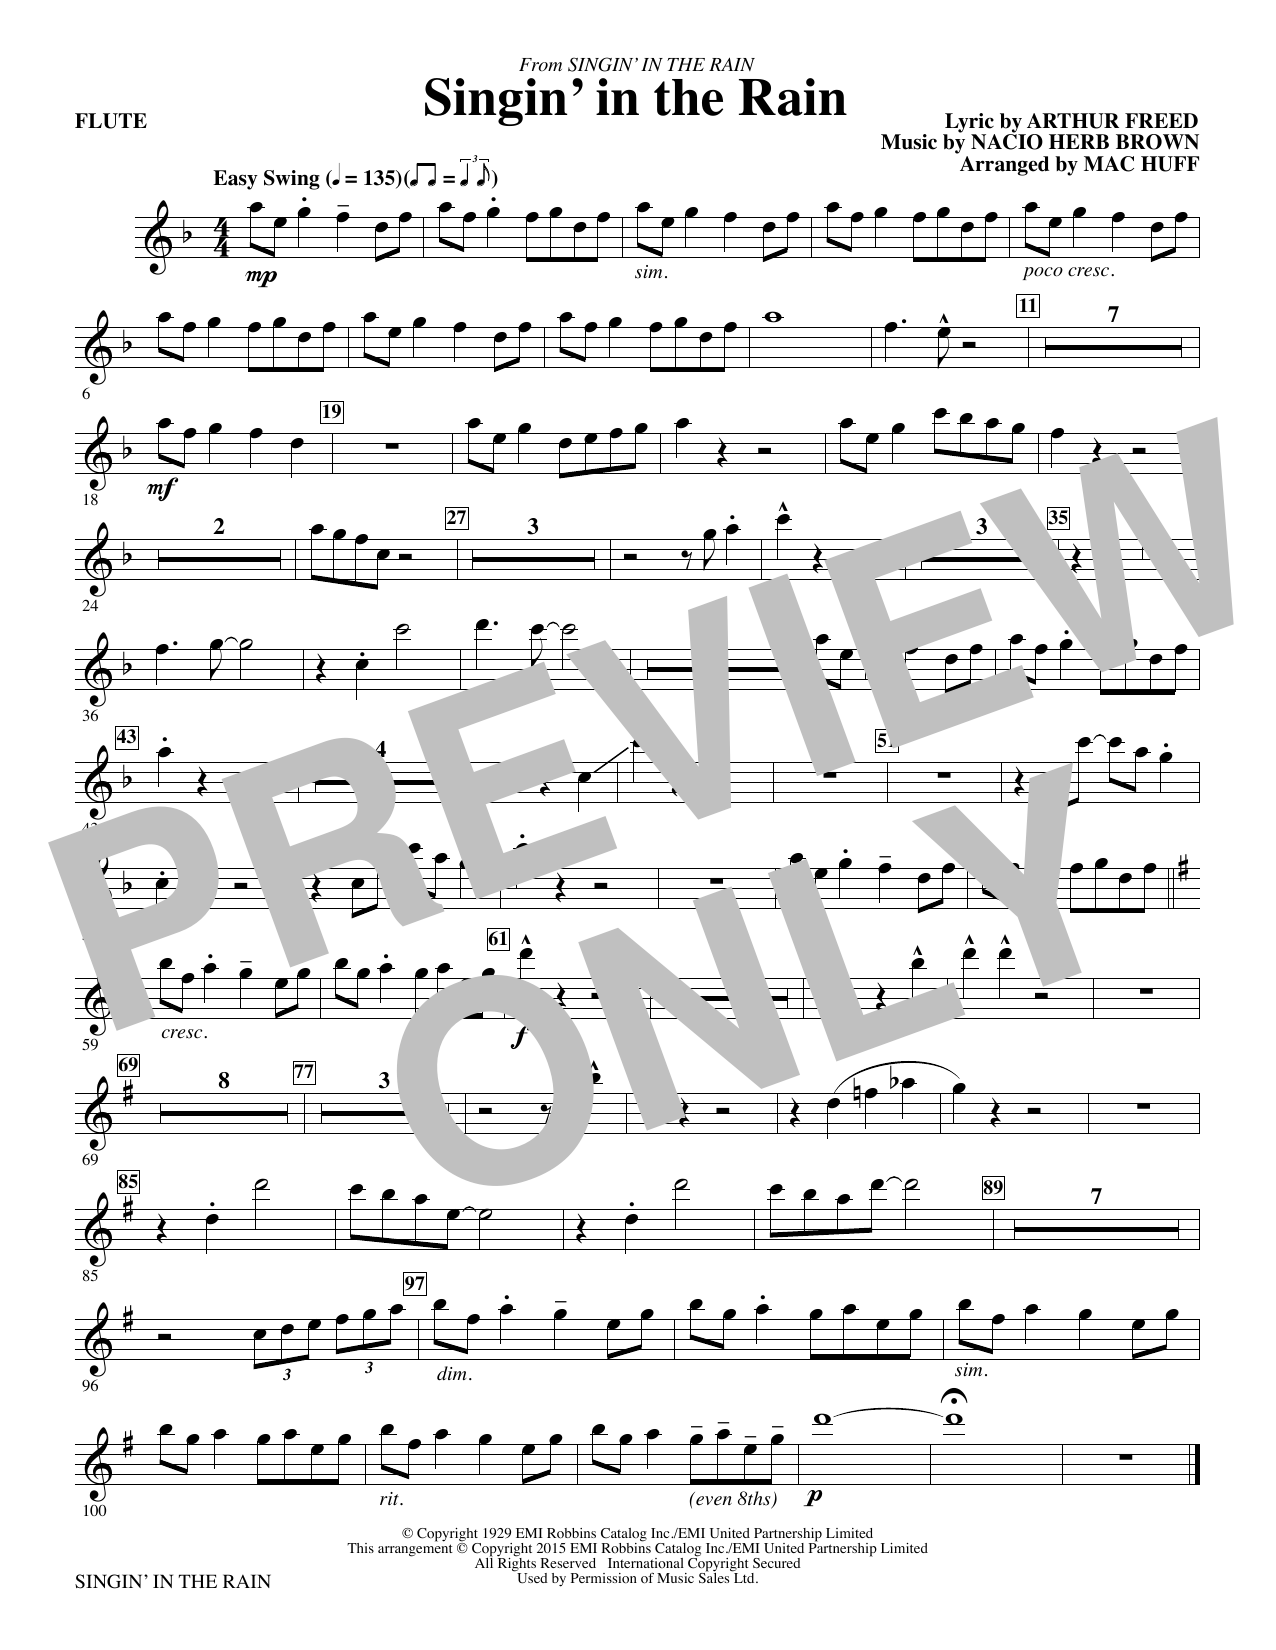 Gene Kelly Singin' in the Rain (arr. Mac Huff) - Flute sheet music notes and chords. Download Printable PDF.